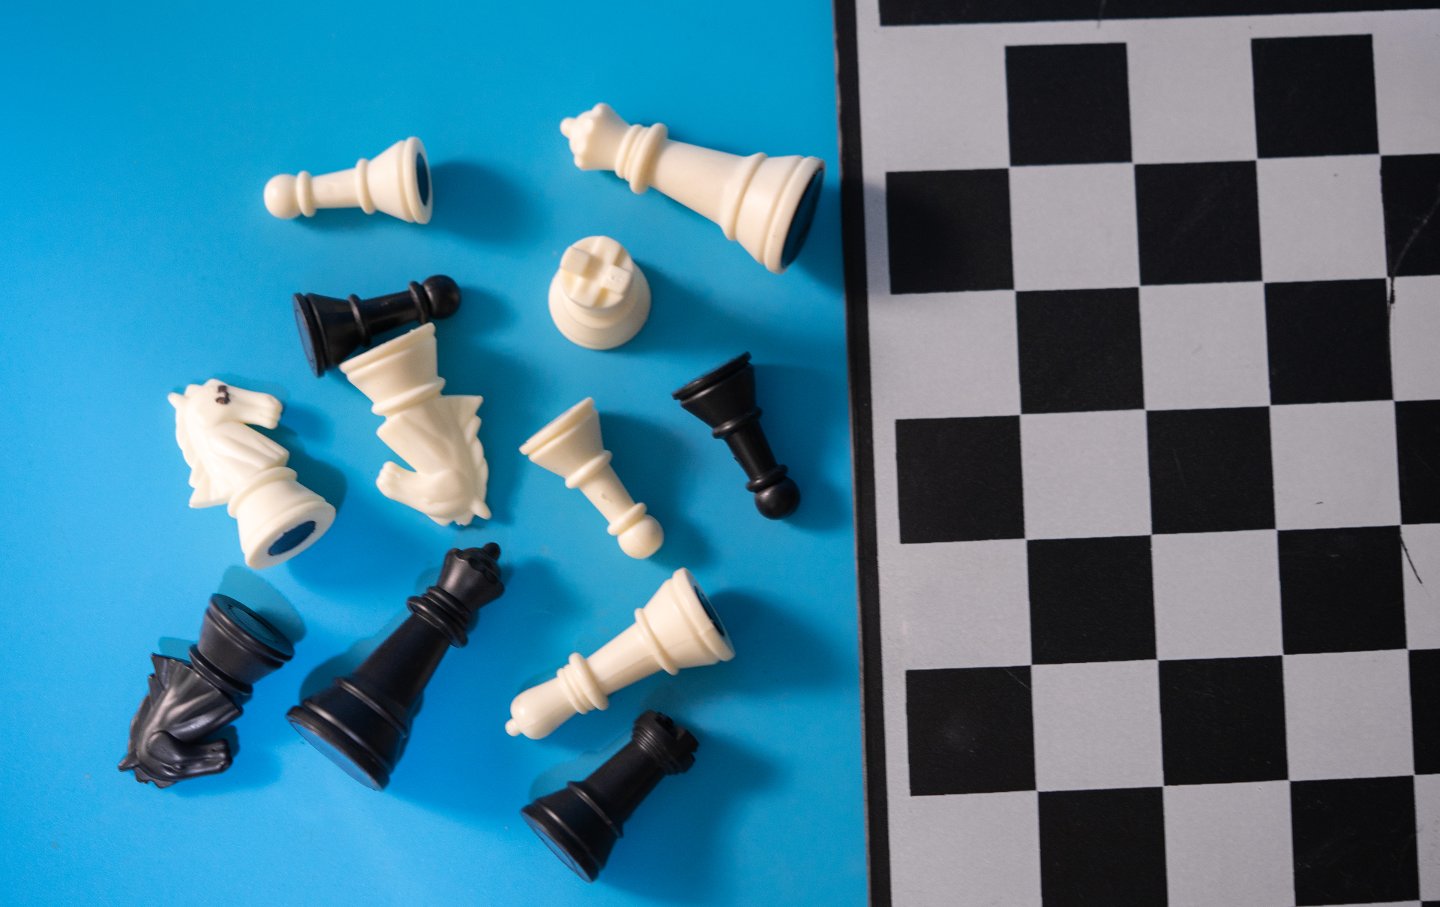 Does playing chess make you smarter? A look at the evidence